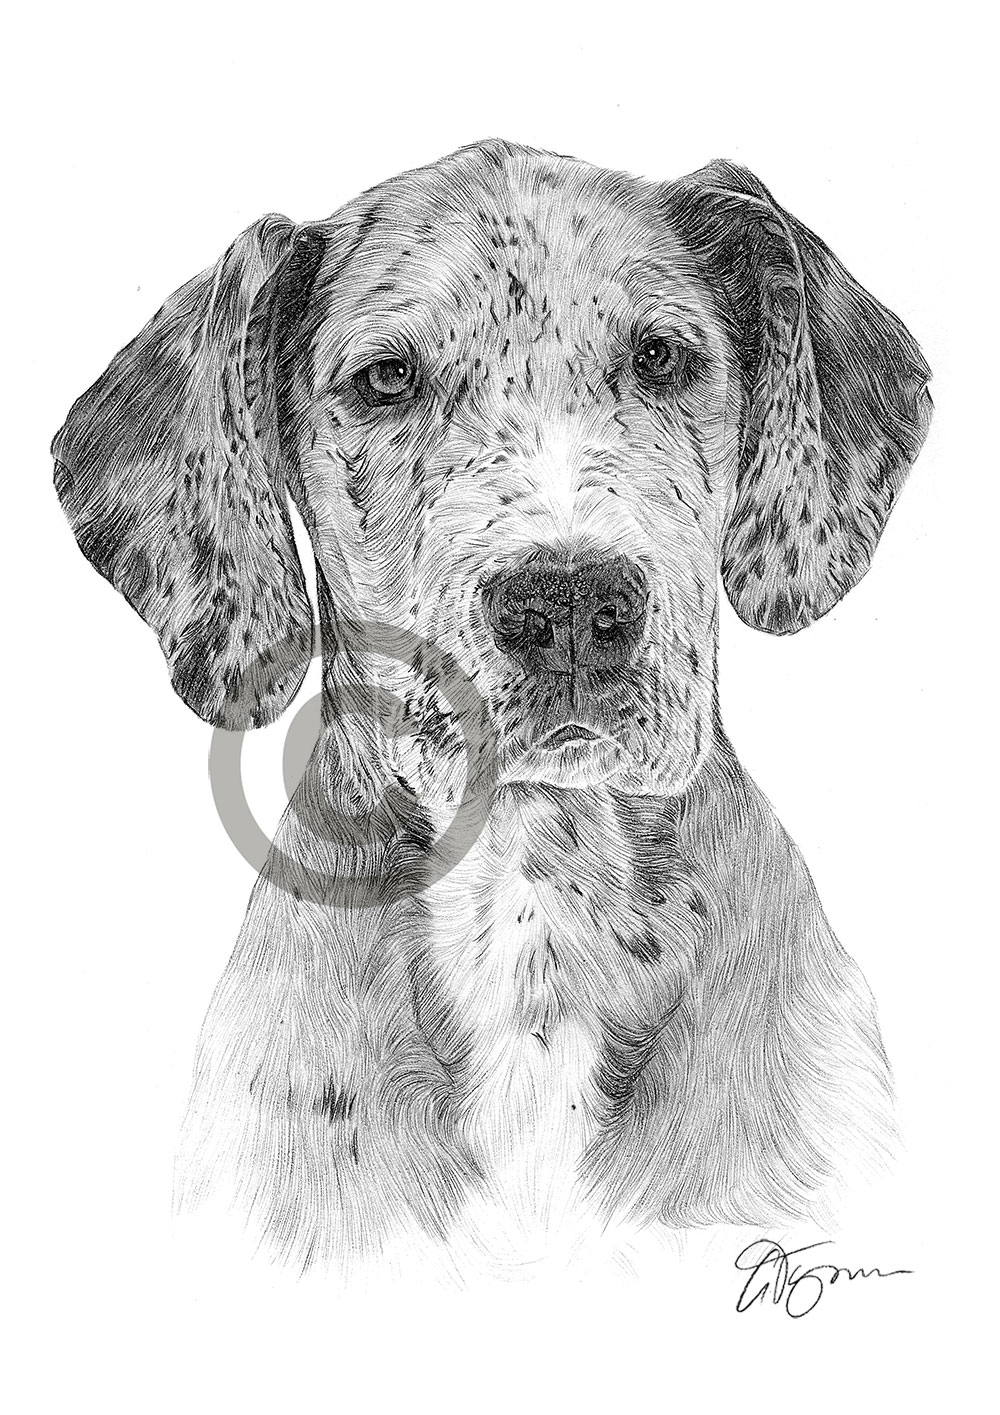 Pencil drawing of a Great Dane by artist Gary Tymon